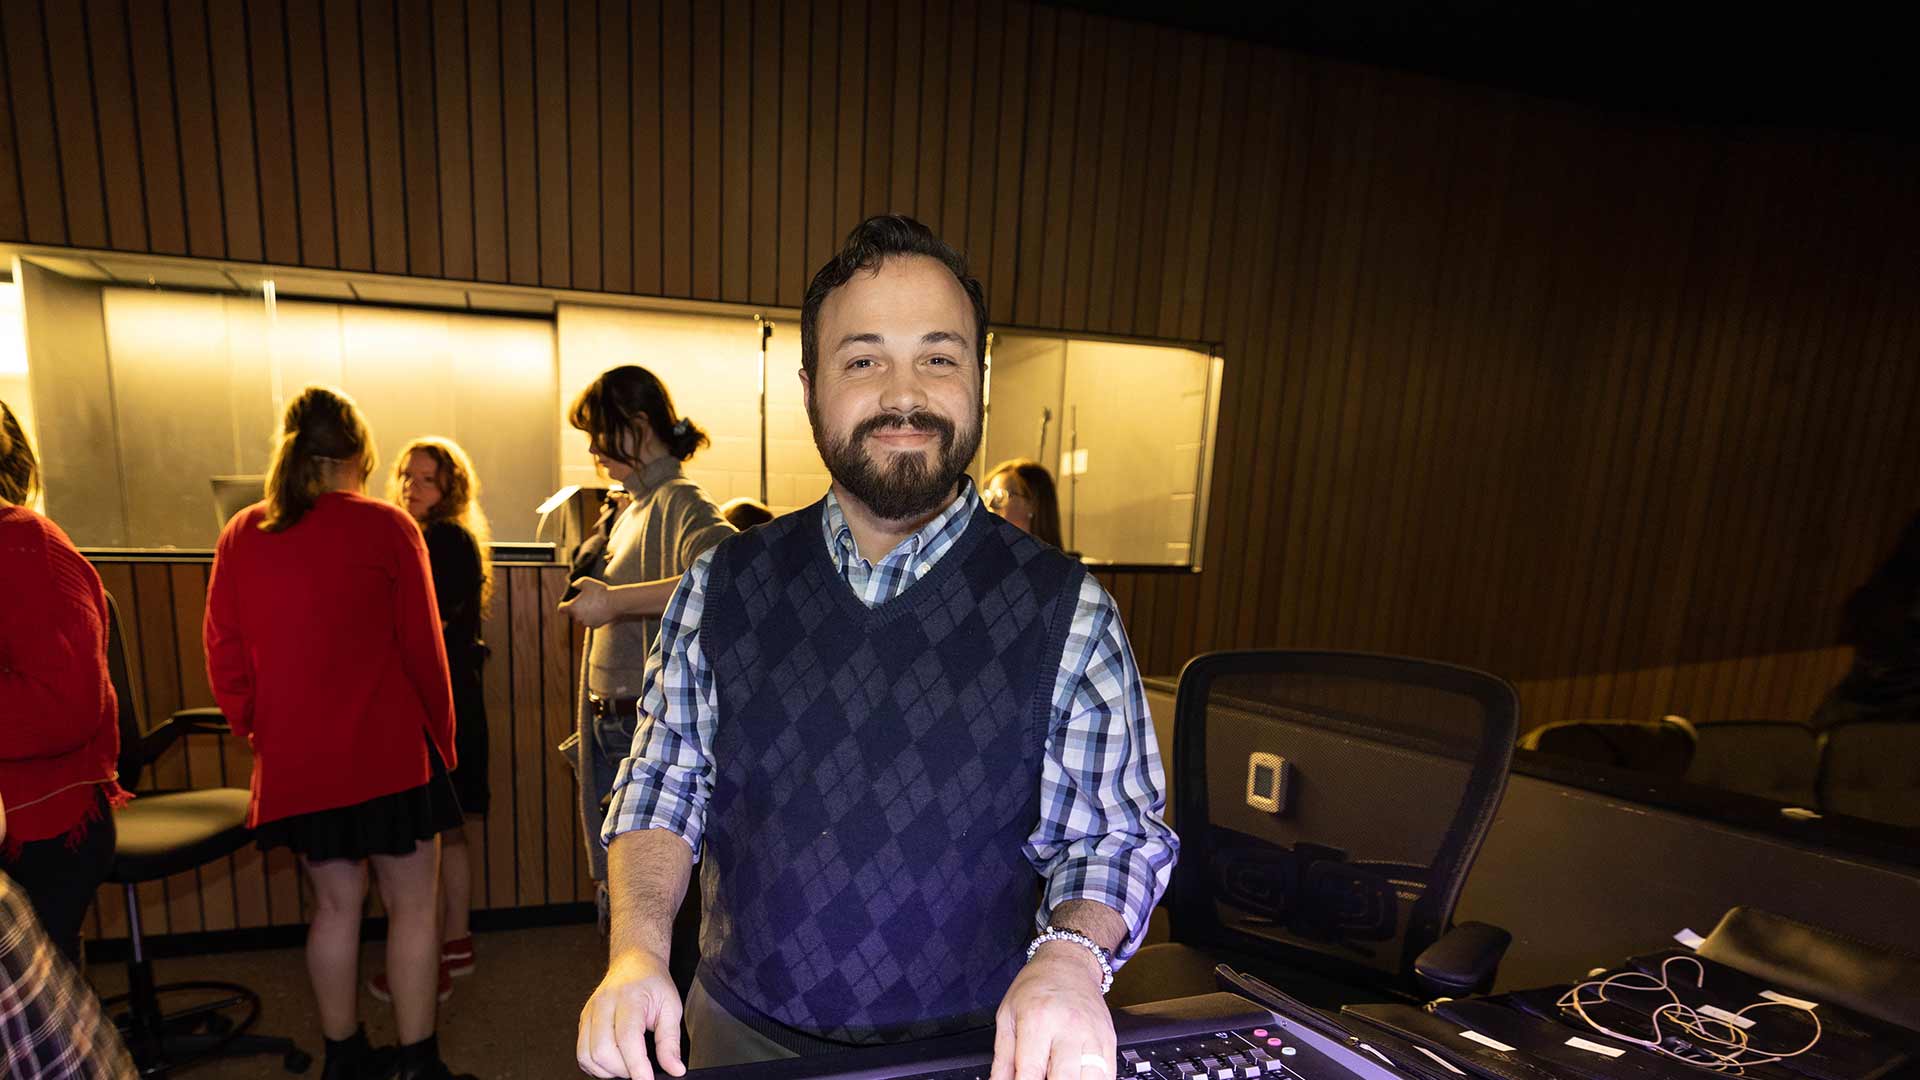 A theater teacher smiles from behind a soundboard during class. Students are seen behind him.